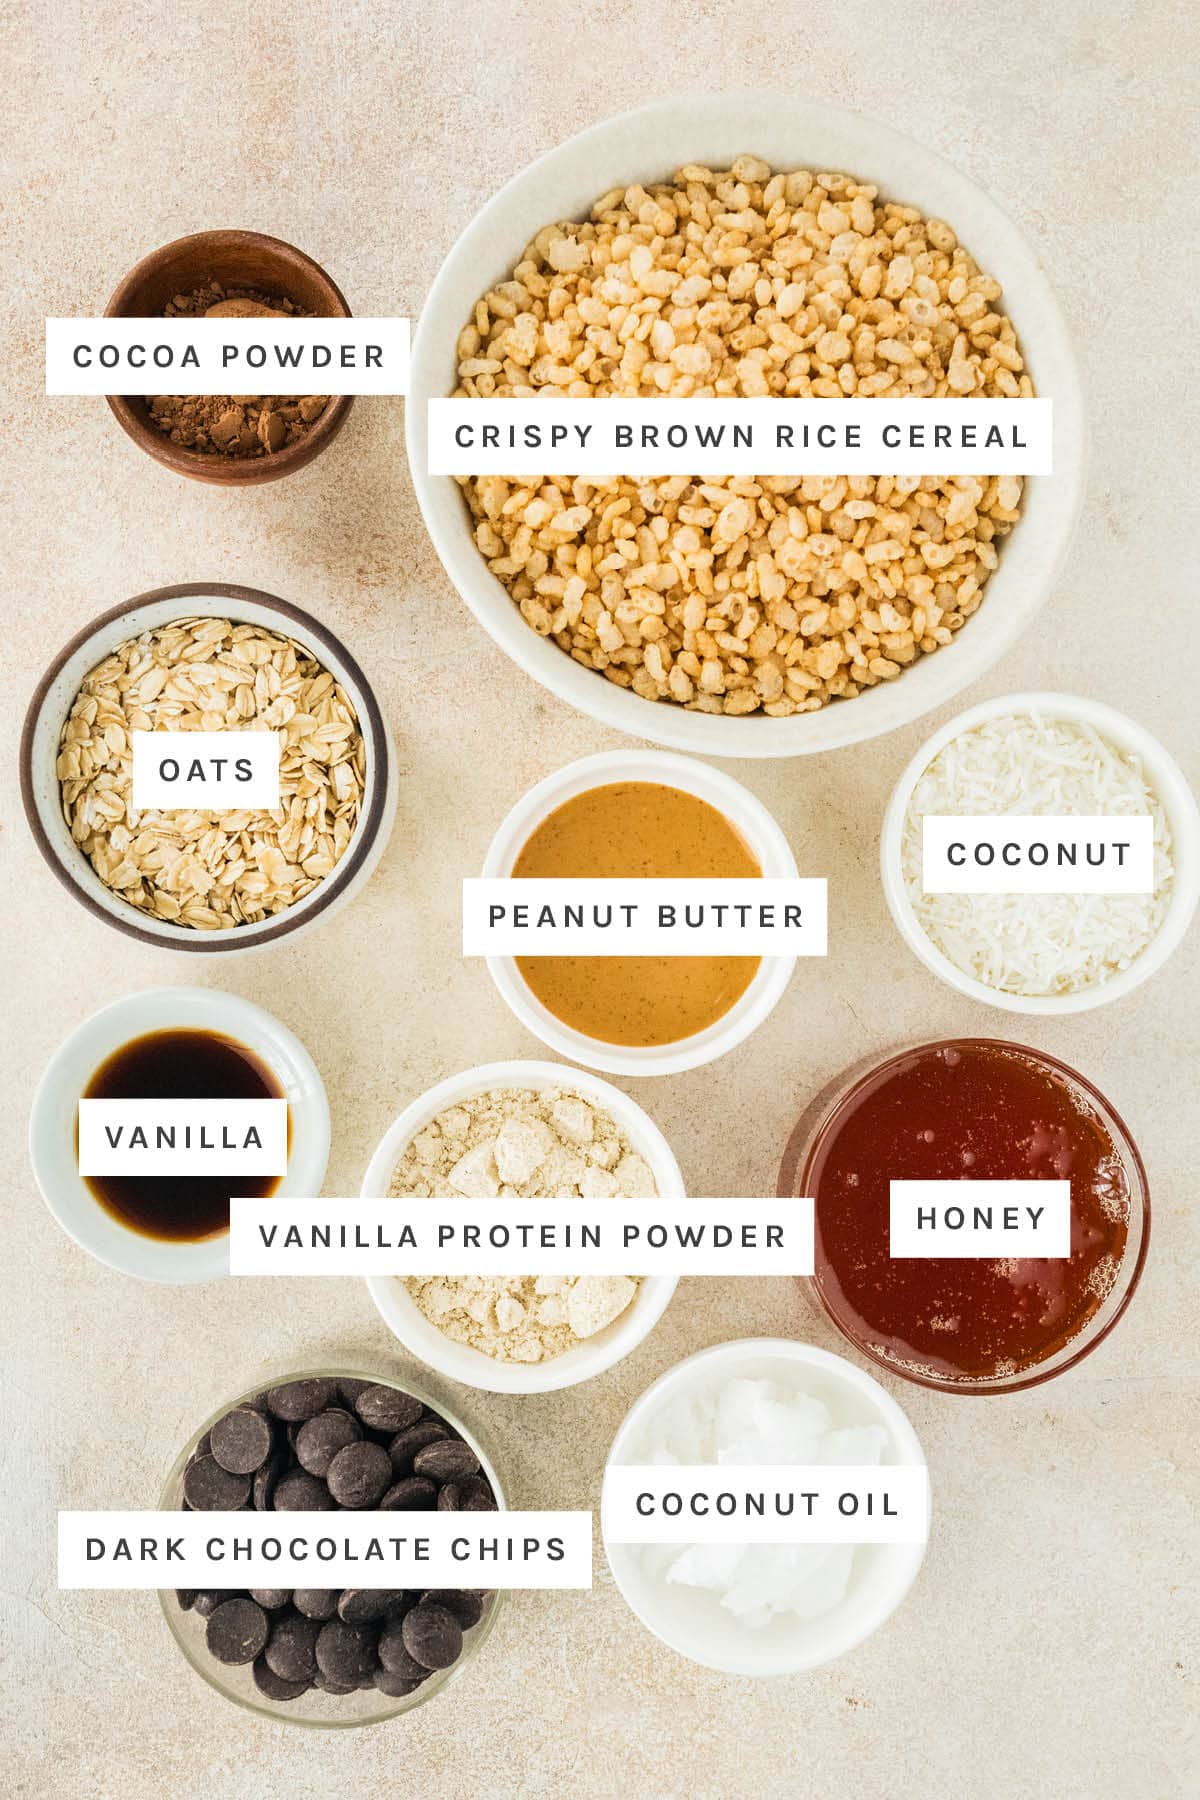 Ingredients measured out to make Crunchy Protein Bars: cocoa powder, crispy brown rice cereal, oats, peanut butter, coconut, vanilla, vanilla protein powder, honey, dark chocolate chips and coconut oil.